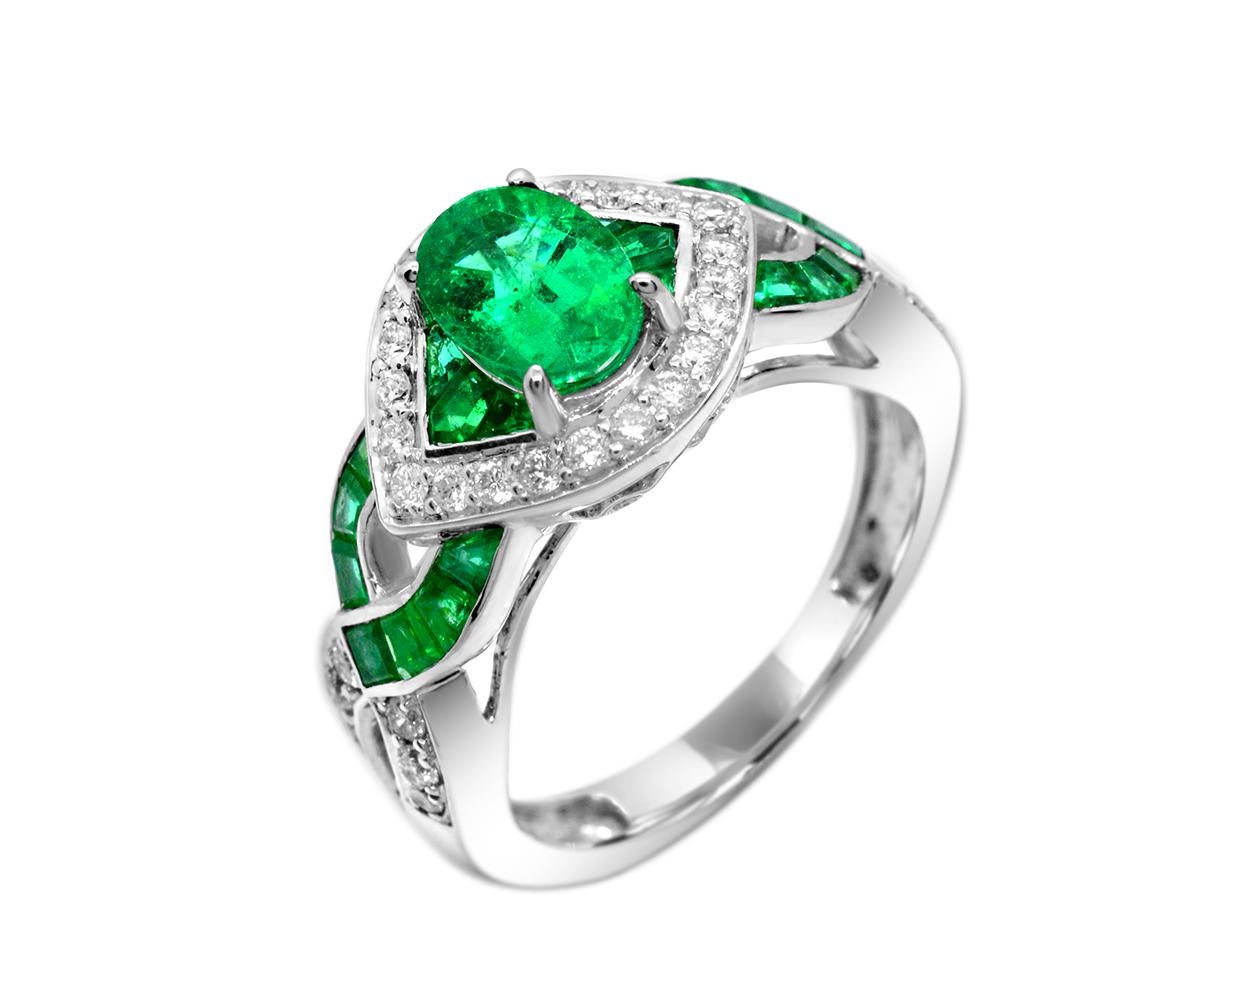 This cross-over emerald and diamond cocktail ring is 14 Karat white gold. It has a protective feel with its subtle green colored evil-eye shape.

Size 7 x 5 oval 0.85 carat emerald center
0.60 carat baguette emeralds
0.30 cttw white diamonds
14k